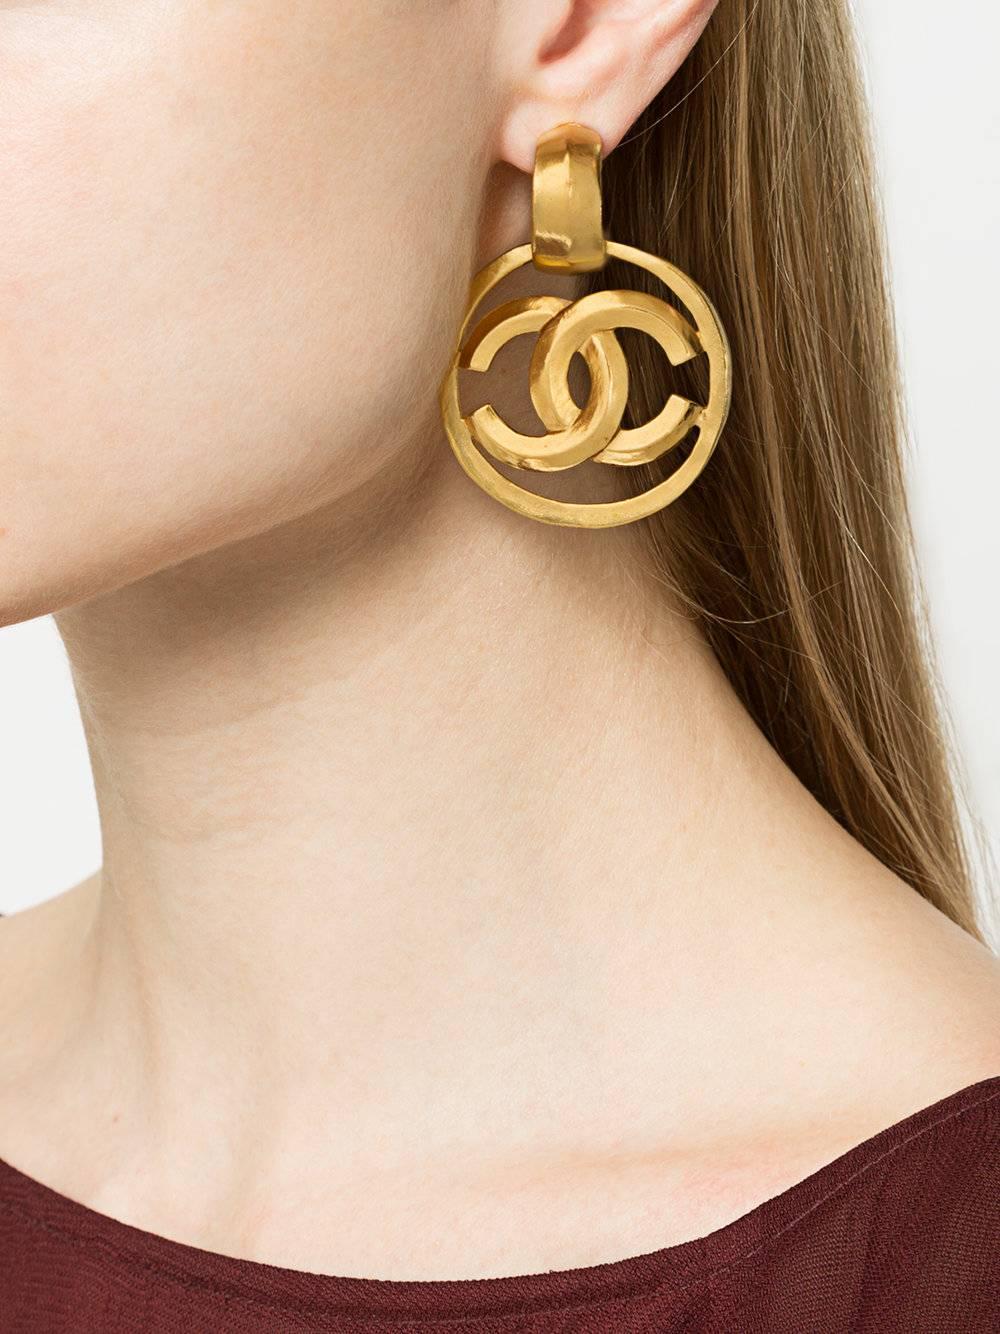 Chanel CC Gold Charm Round Circle Hoop Doorknocker Large Dangle Earrings

Metal
Gold tone
Clip on closure 
Made in France
Width 1.5